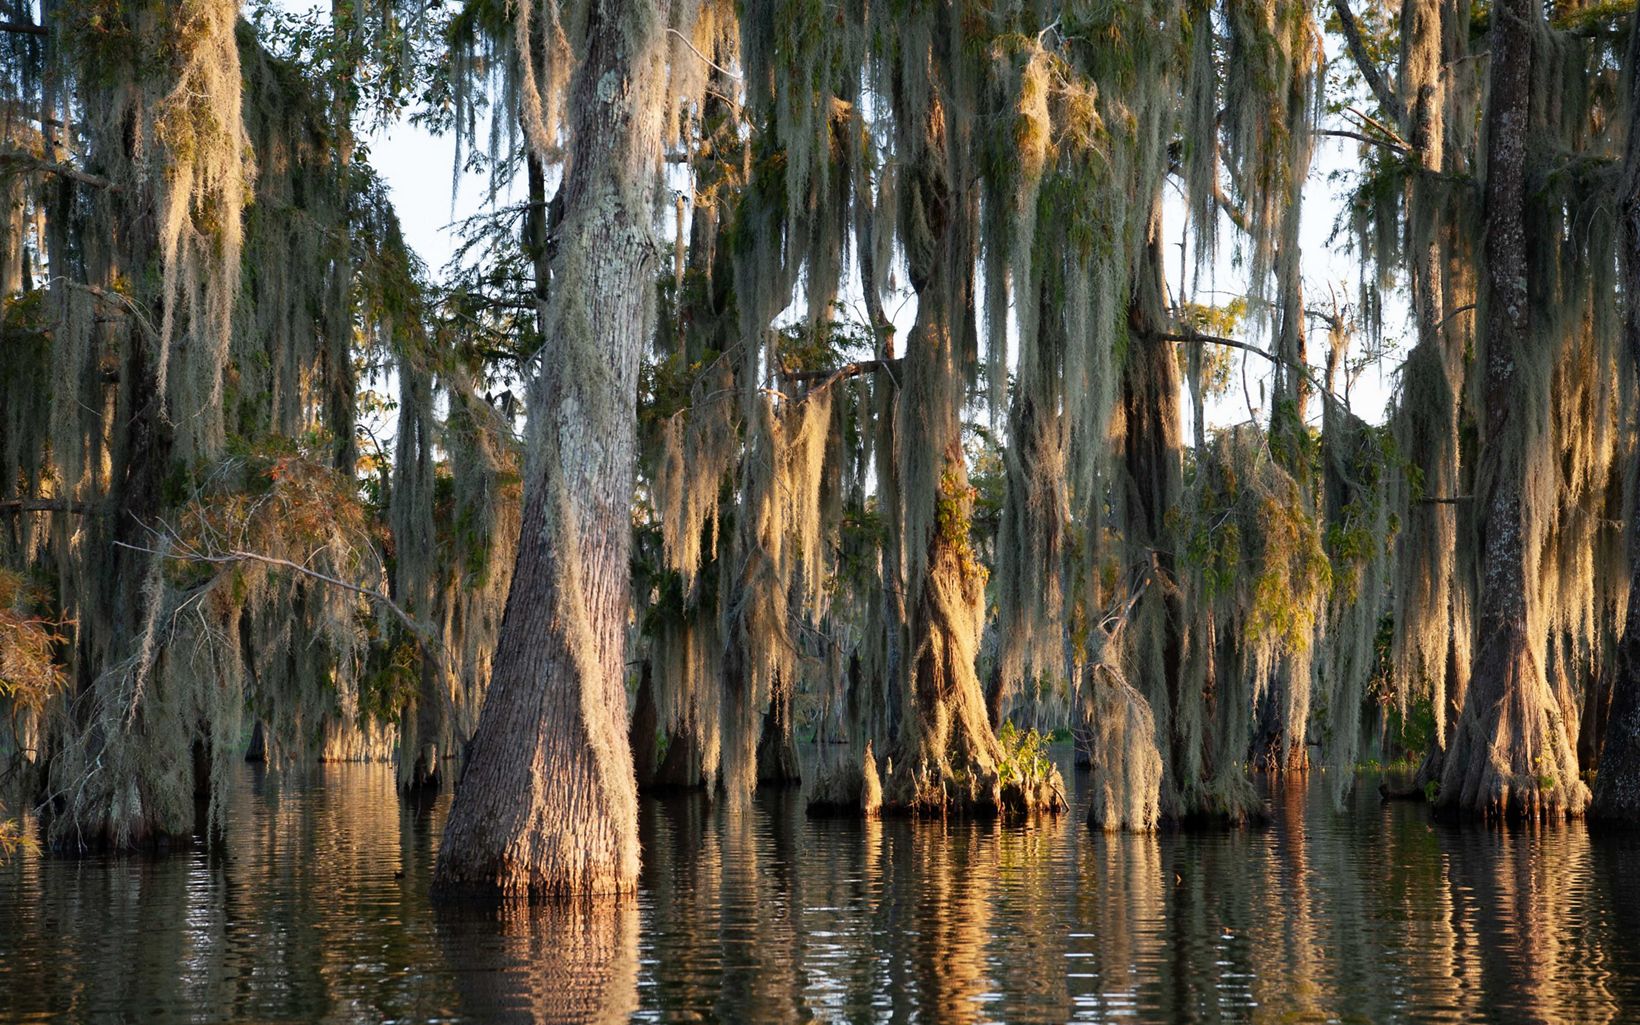 A stand of trees are submerged in water and dappled light illuminates their trunks and the moss hanging from their branches. 